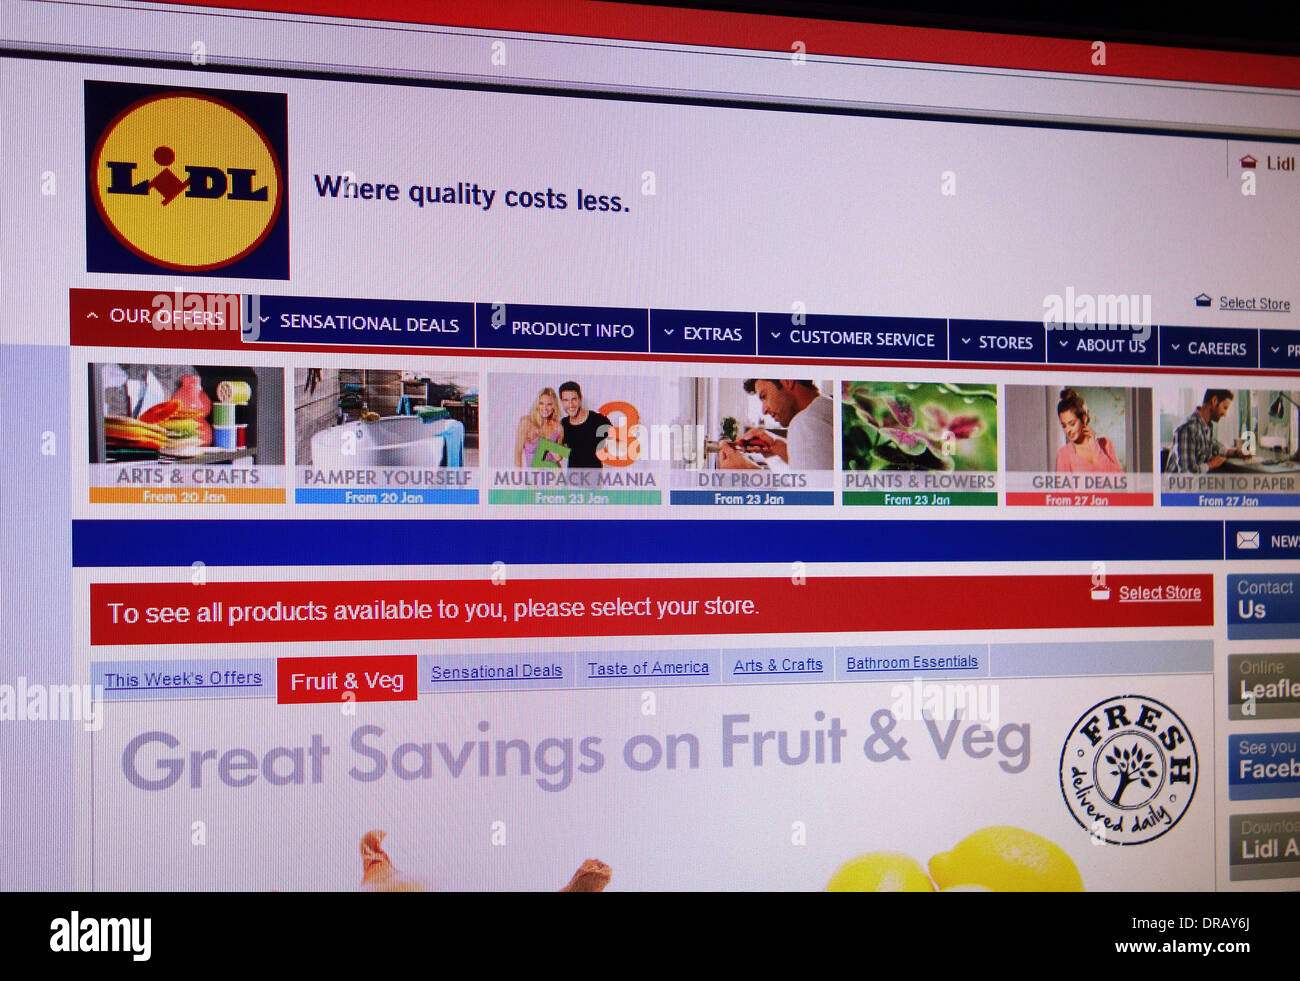 lidl online shopping web site Stock Photo